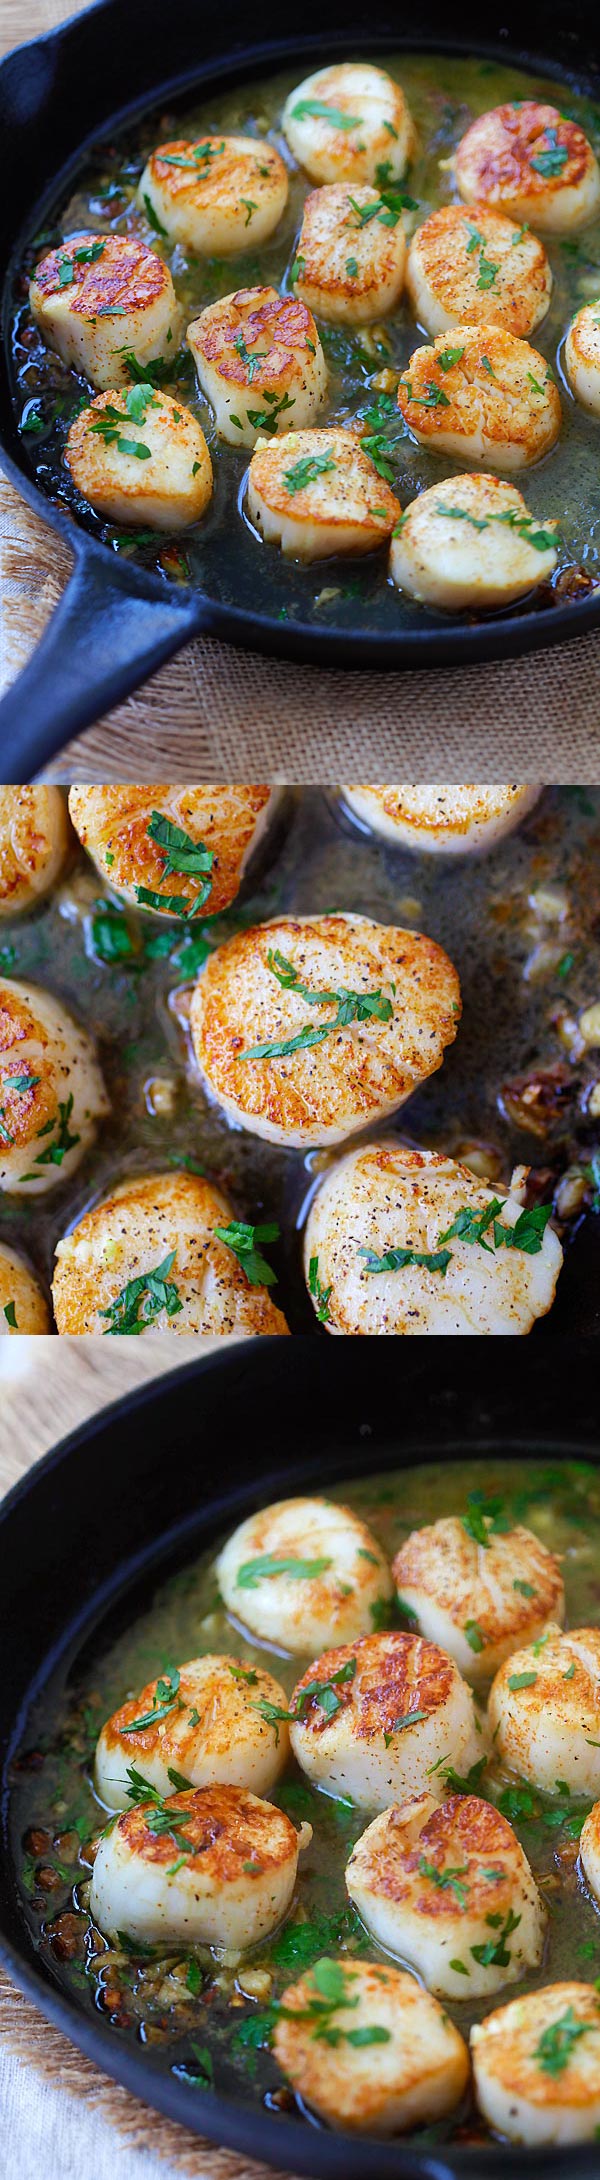 Garlic Scallops – fresh, succulent scallops sauteed with garlic, butter, white wine and parsley. Easy recipe that takes only 15 mins! | rasamalaysia.com